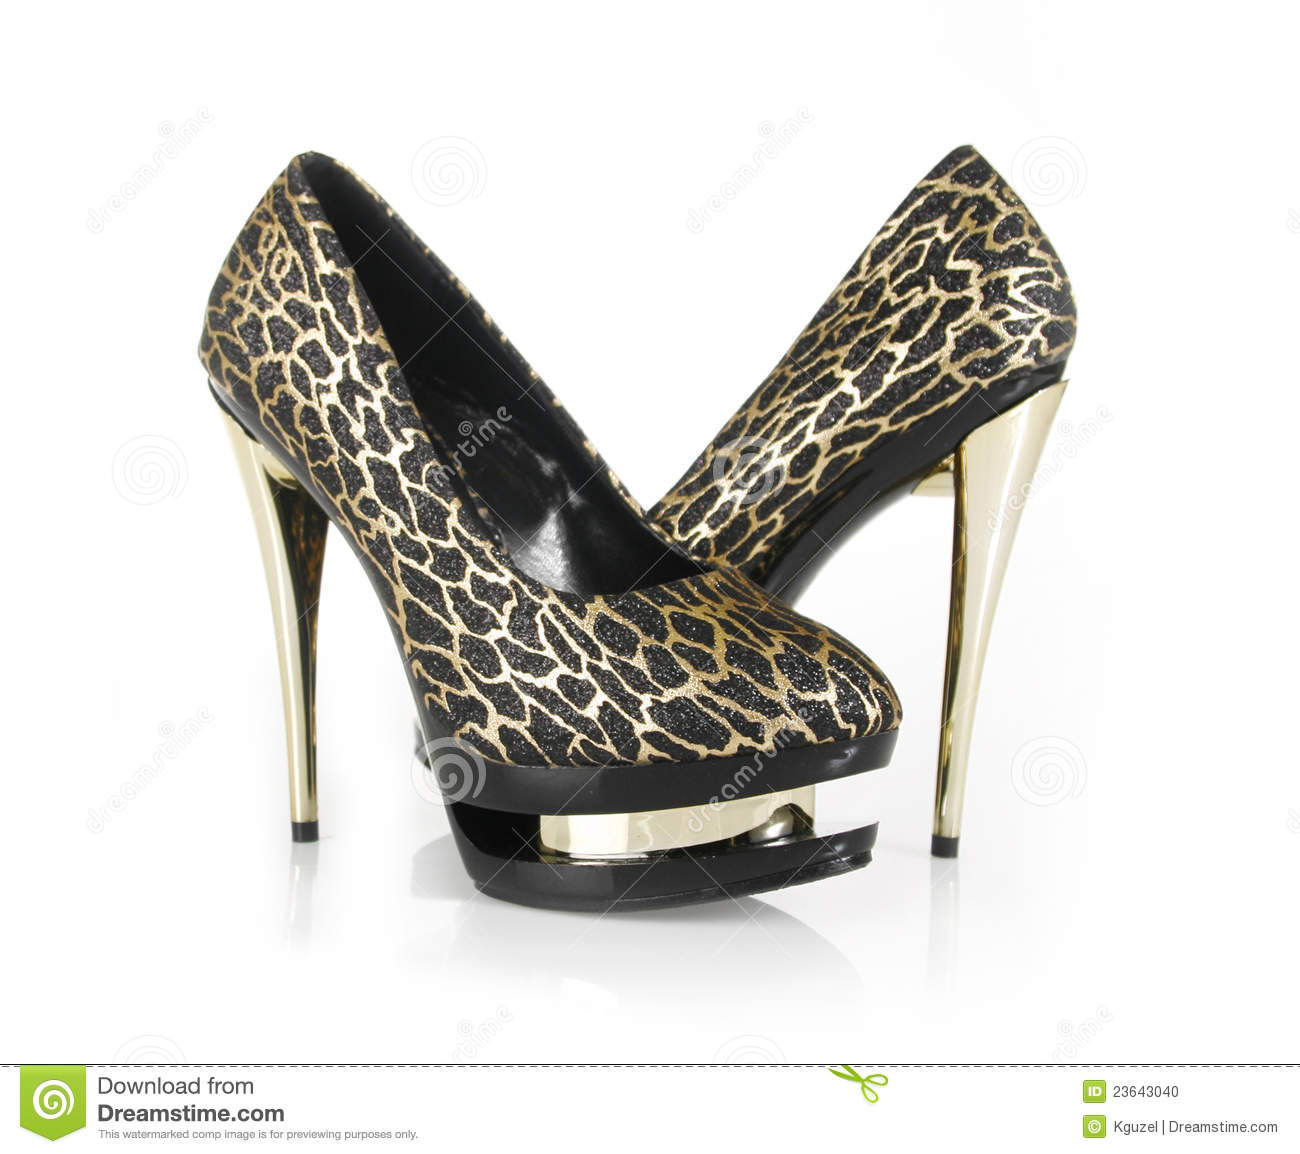 Glitter Black Shoes With Gold Heels Stock Photo   Image  23643040